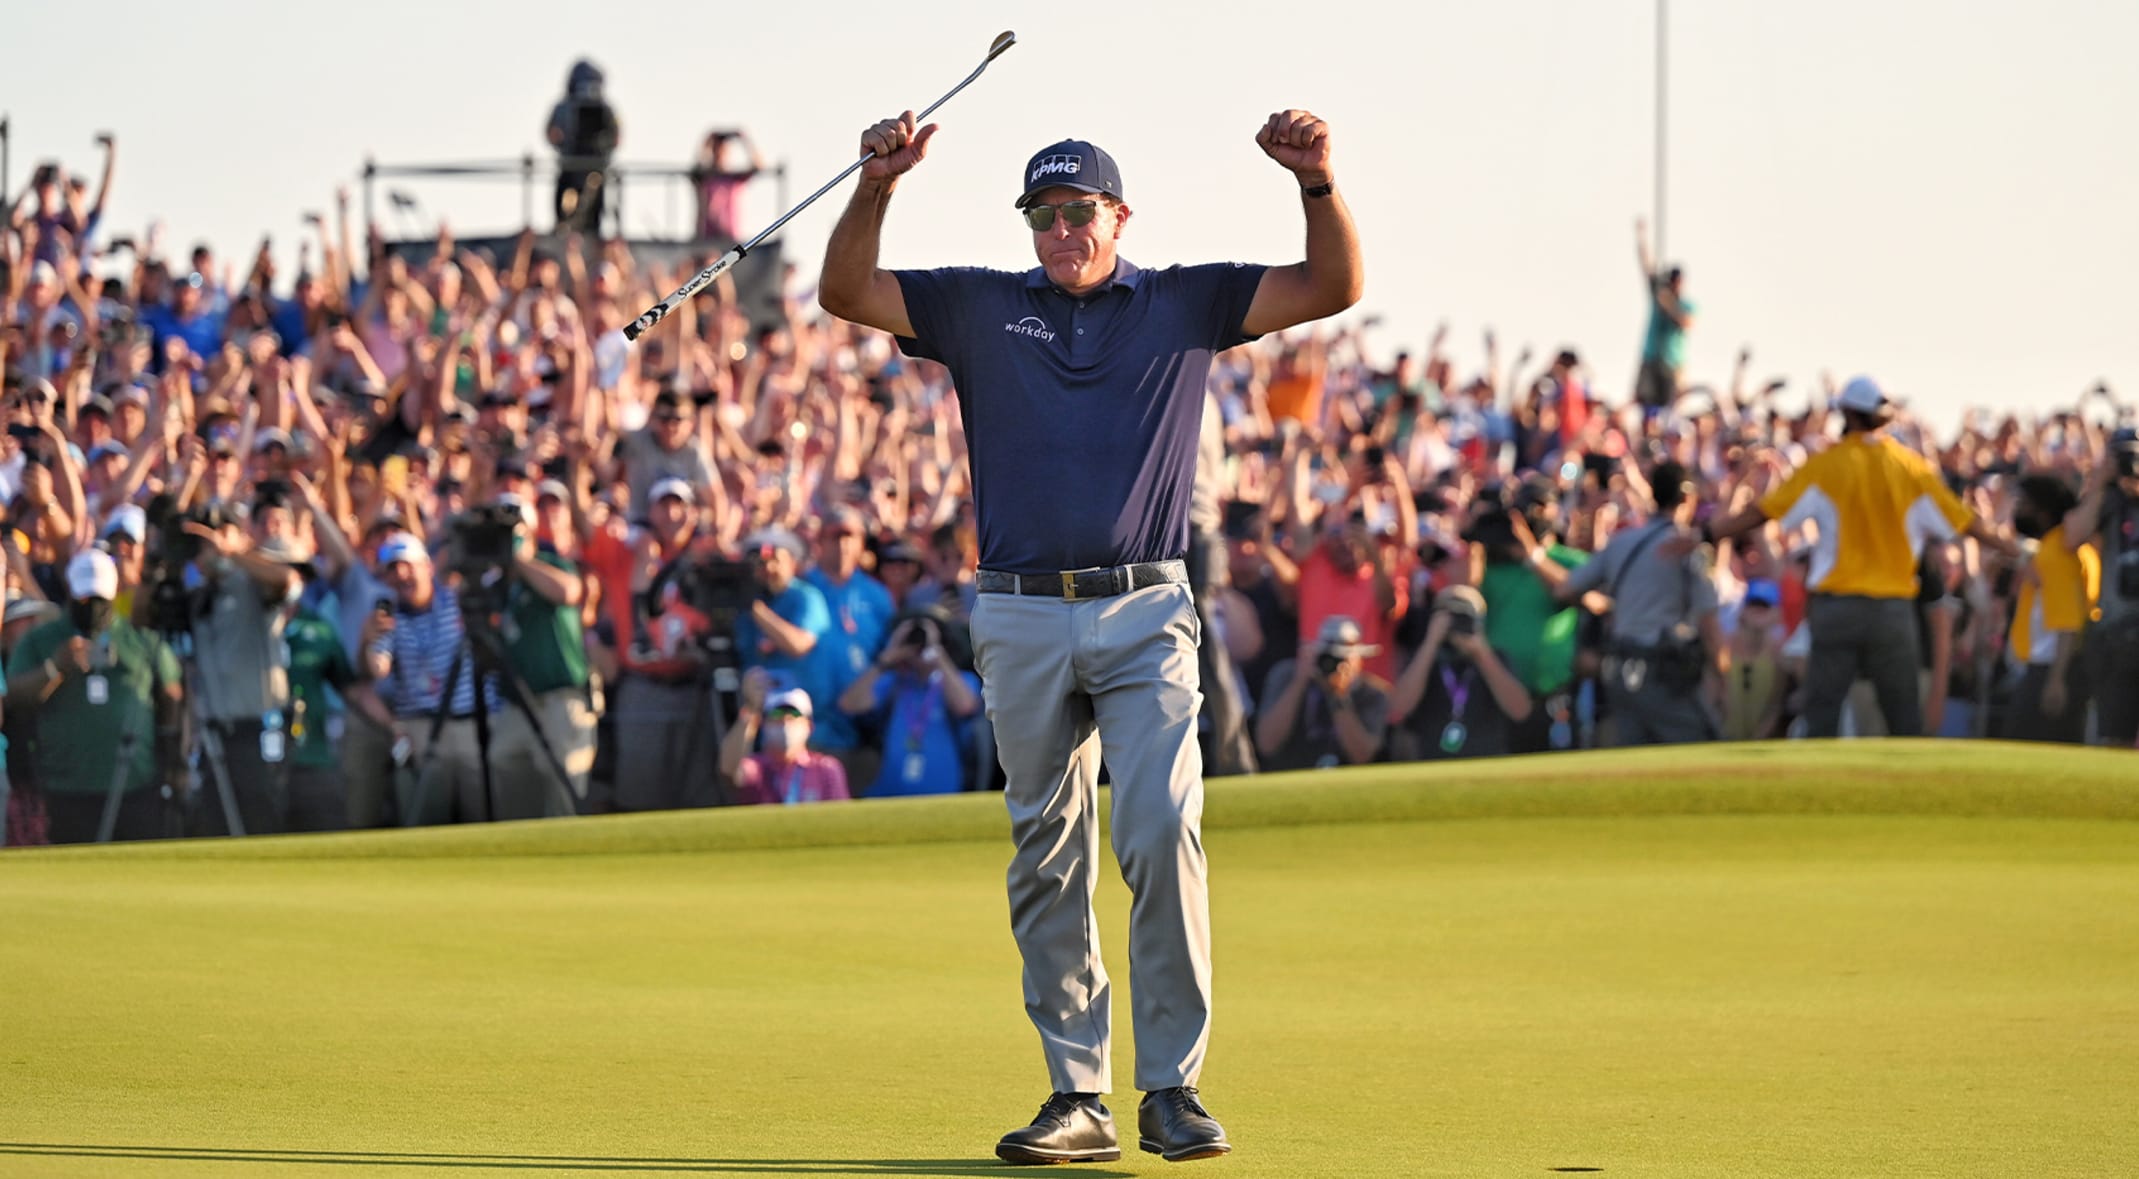 Phil Mickelson inspires after sports world PGA Championship win